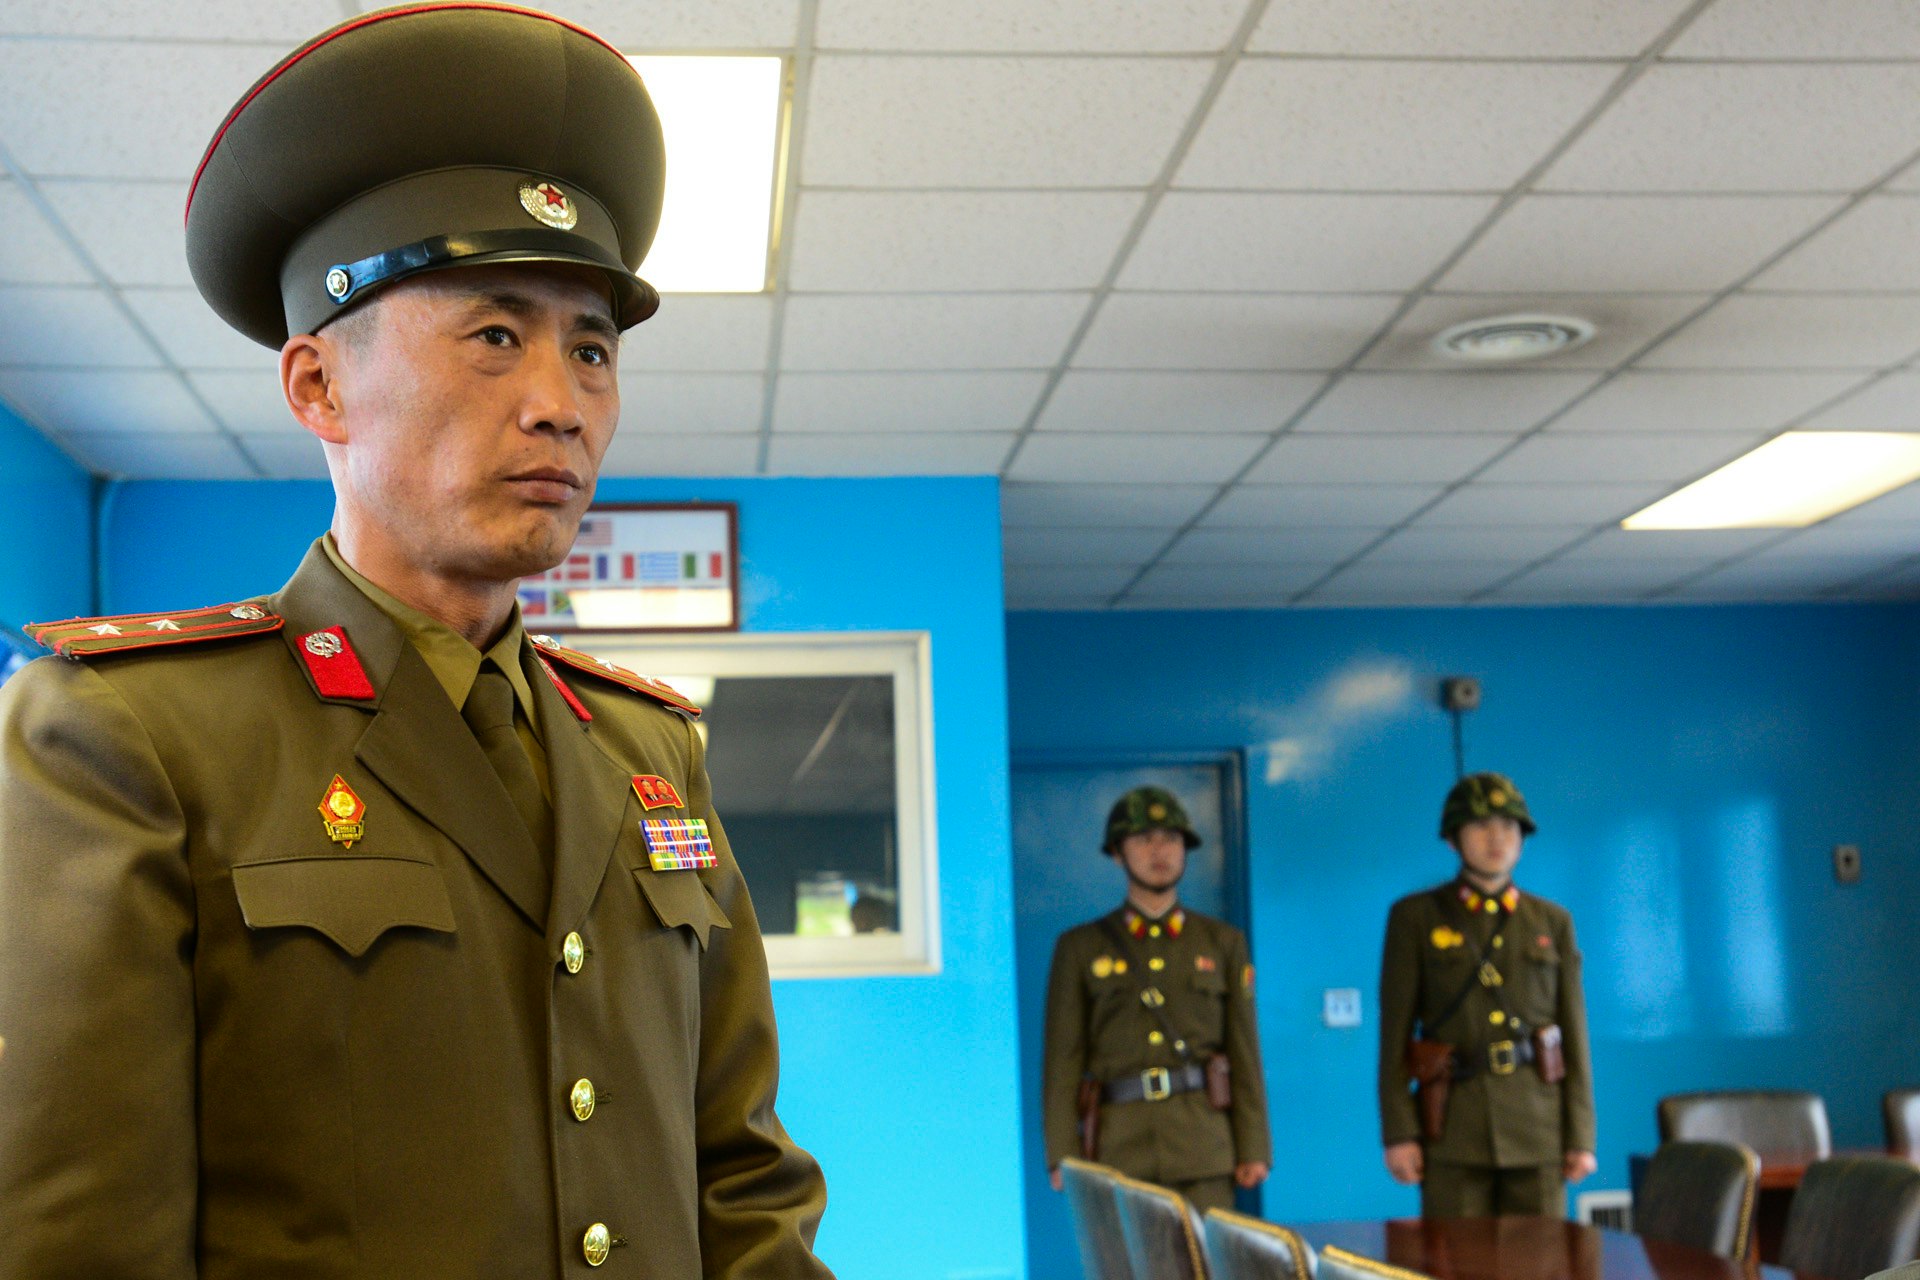 A North Korean officer and soliders stand guard at the old negotiation room at the De-Militarized Zone on the border with South Korea.